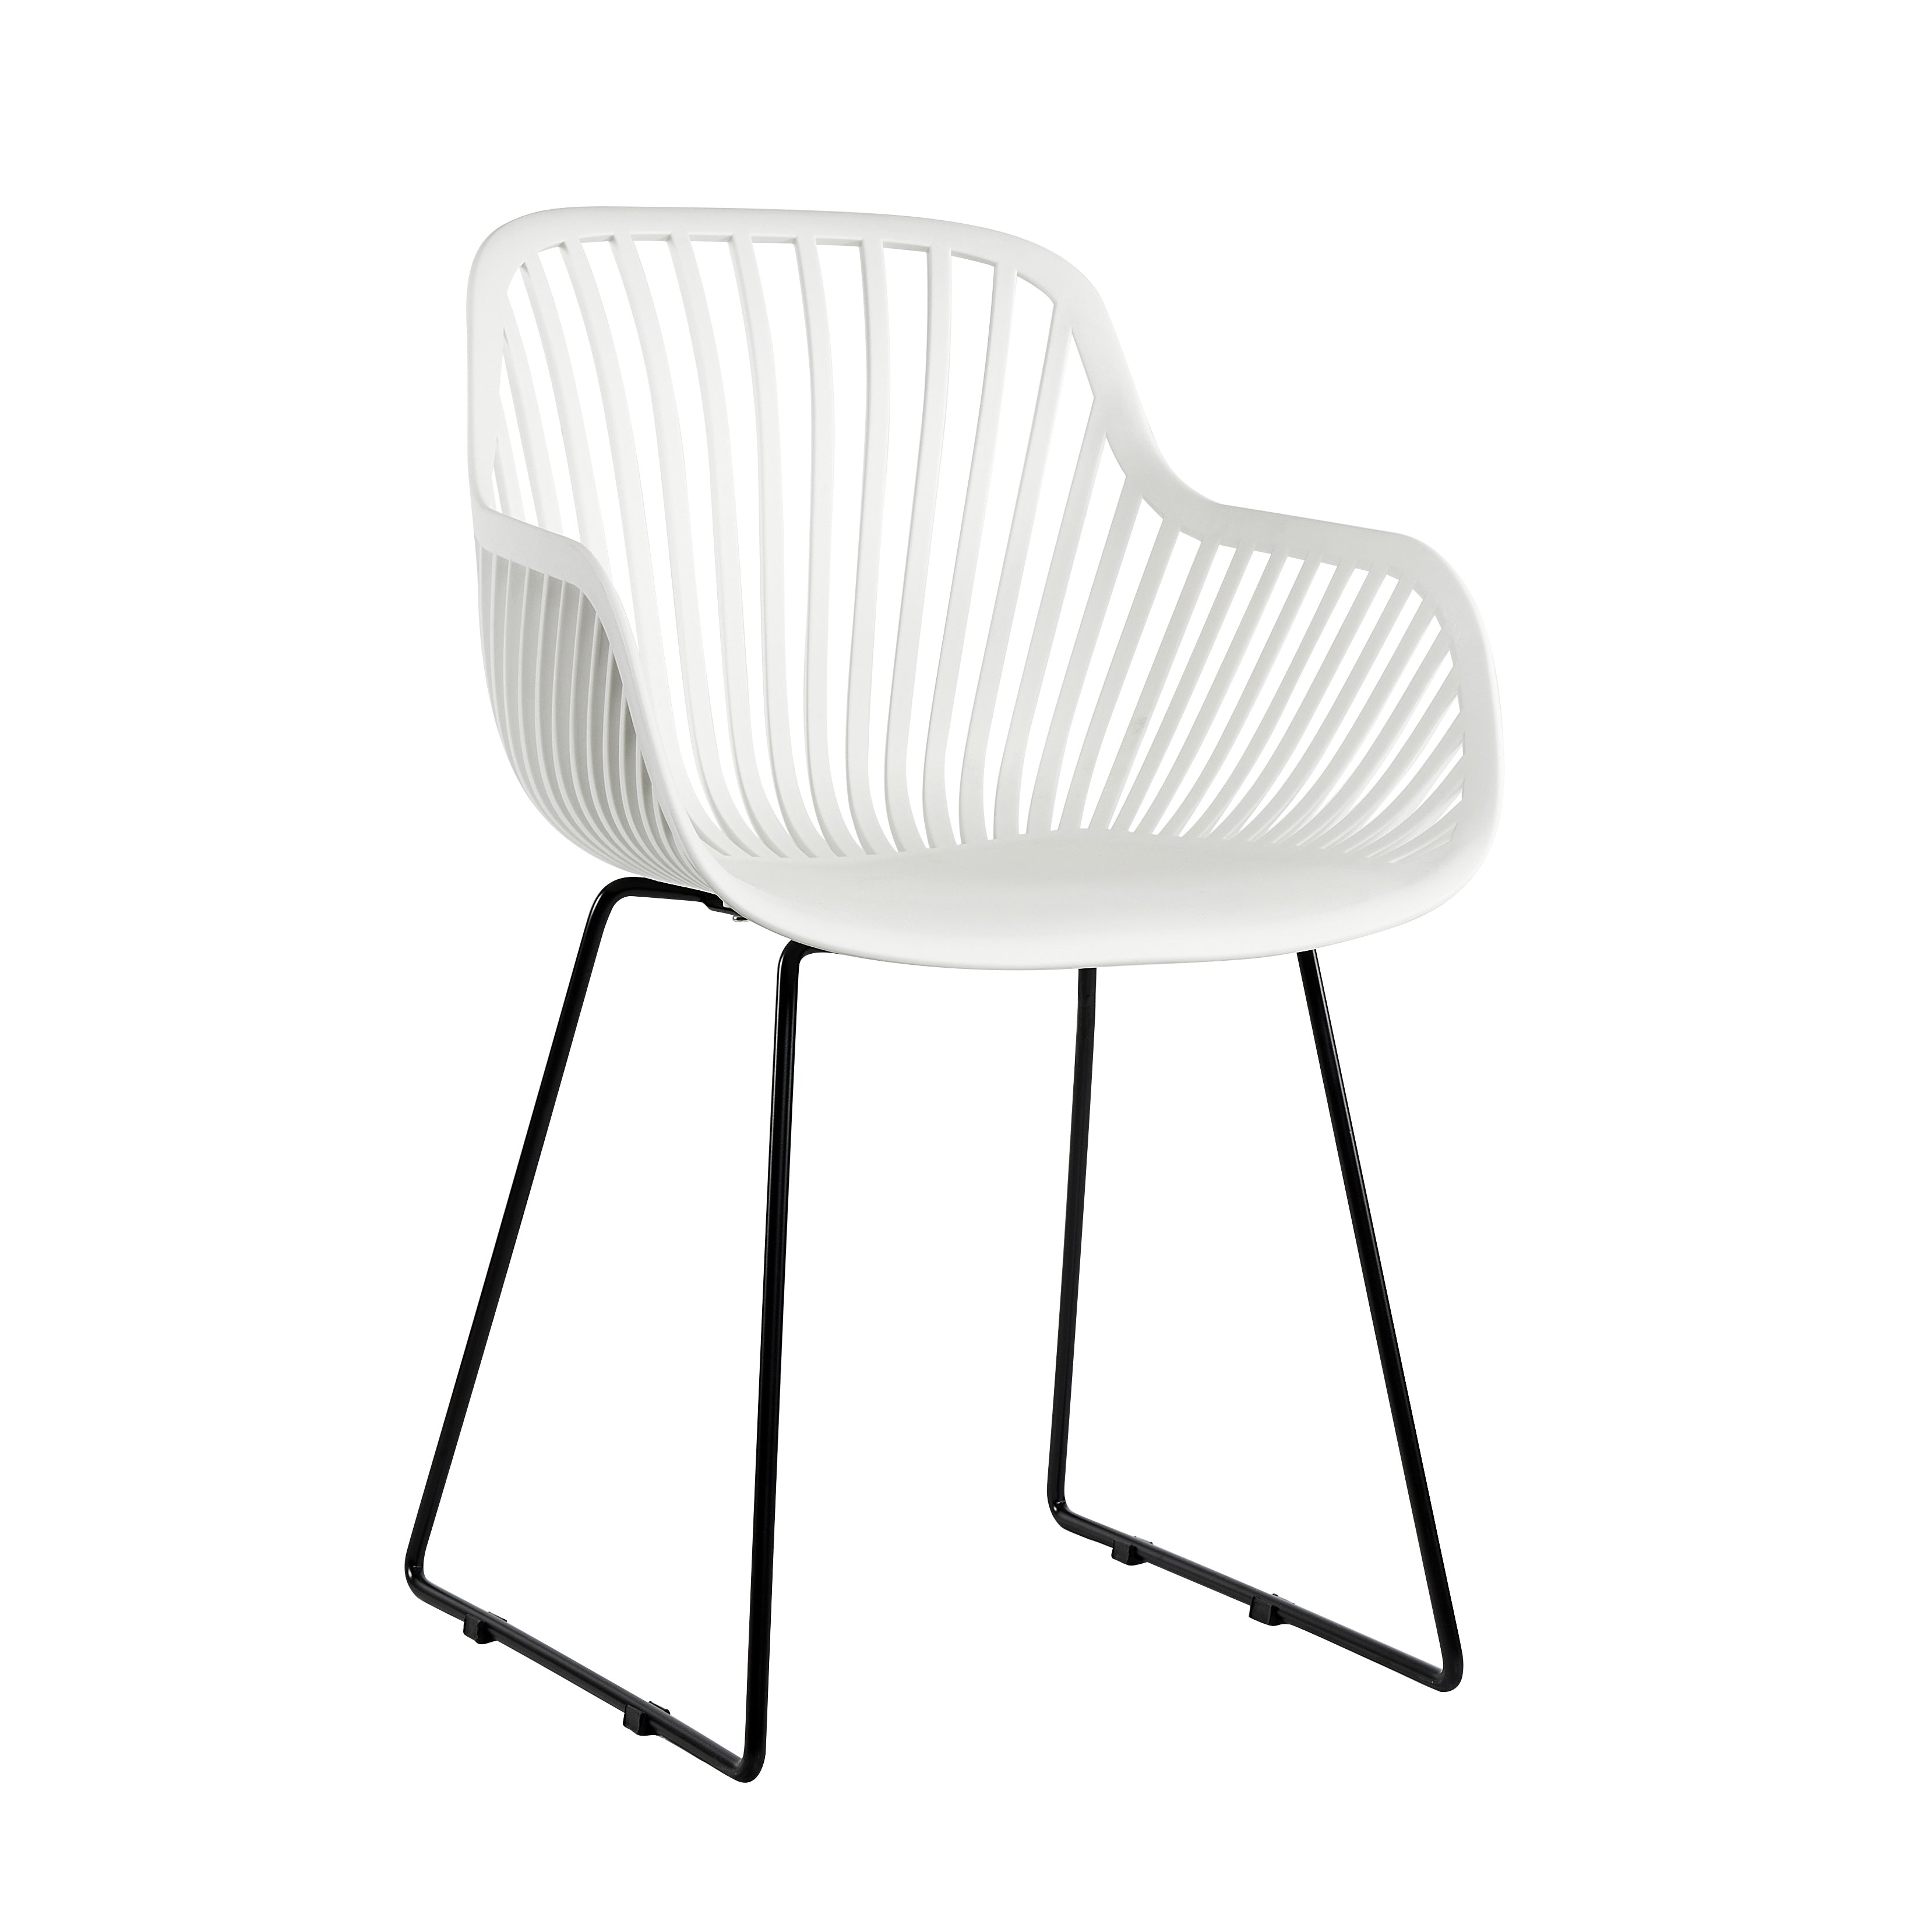 Wally Dining Chair - White